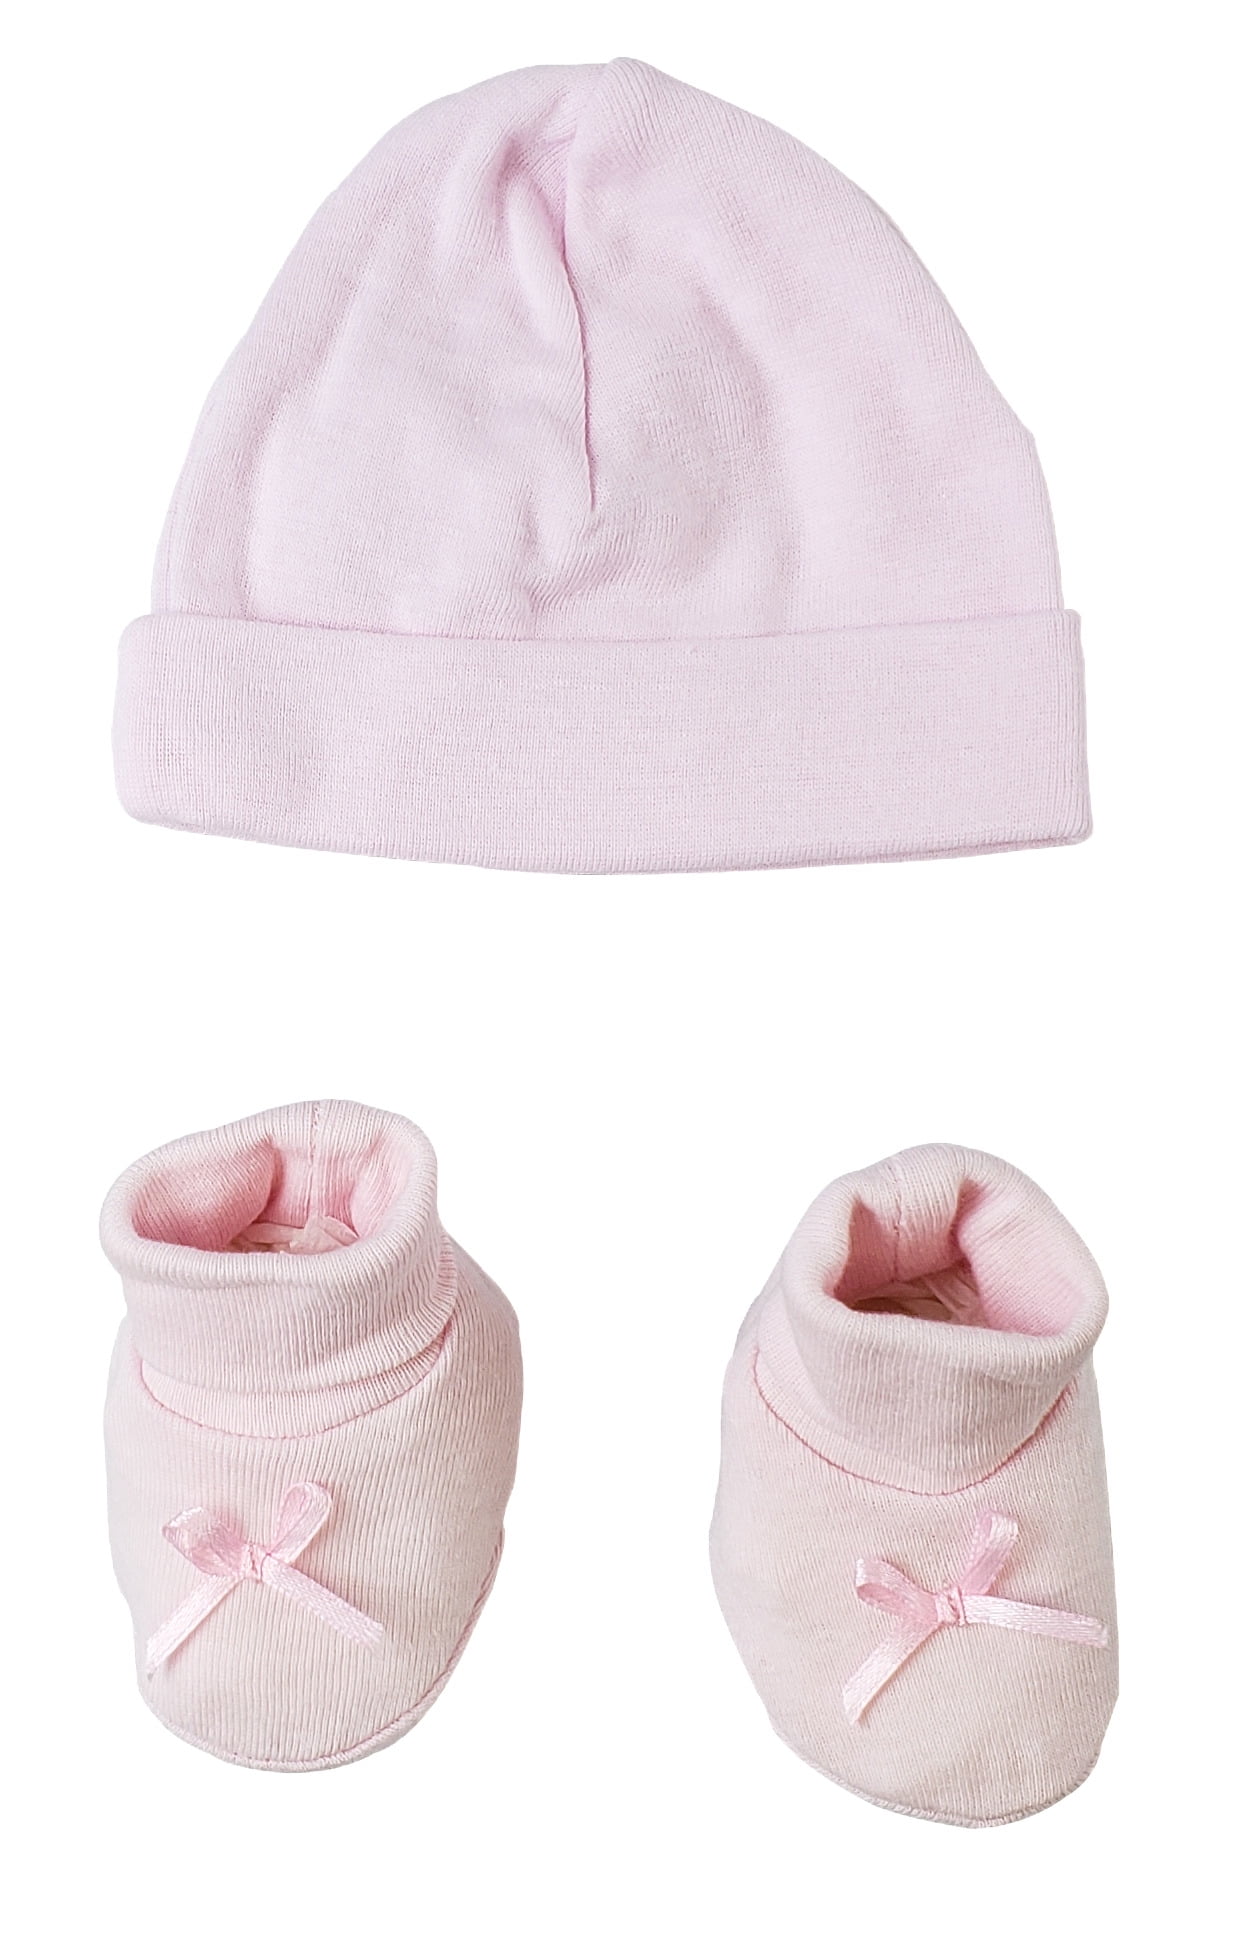 0-6 Months Newborn Baby Soft Cotton Organic Cap and Mitten Set Sunny Hats for Hospital Baby Boy and Girl